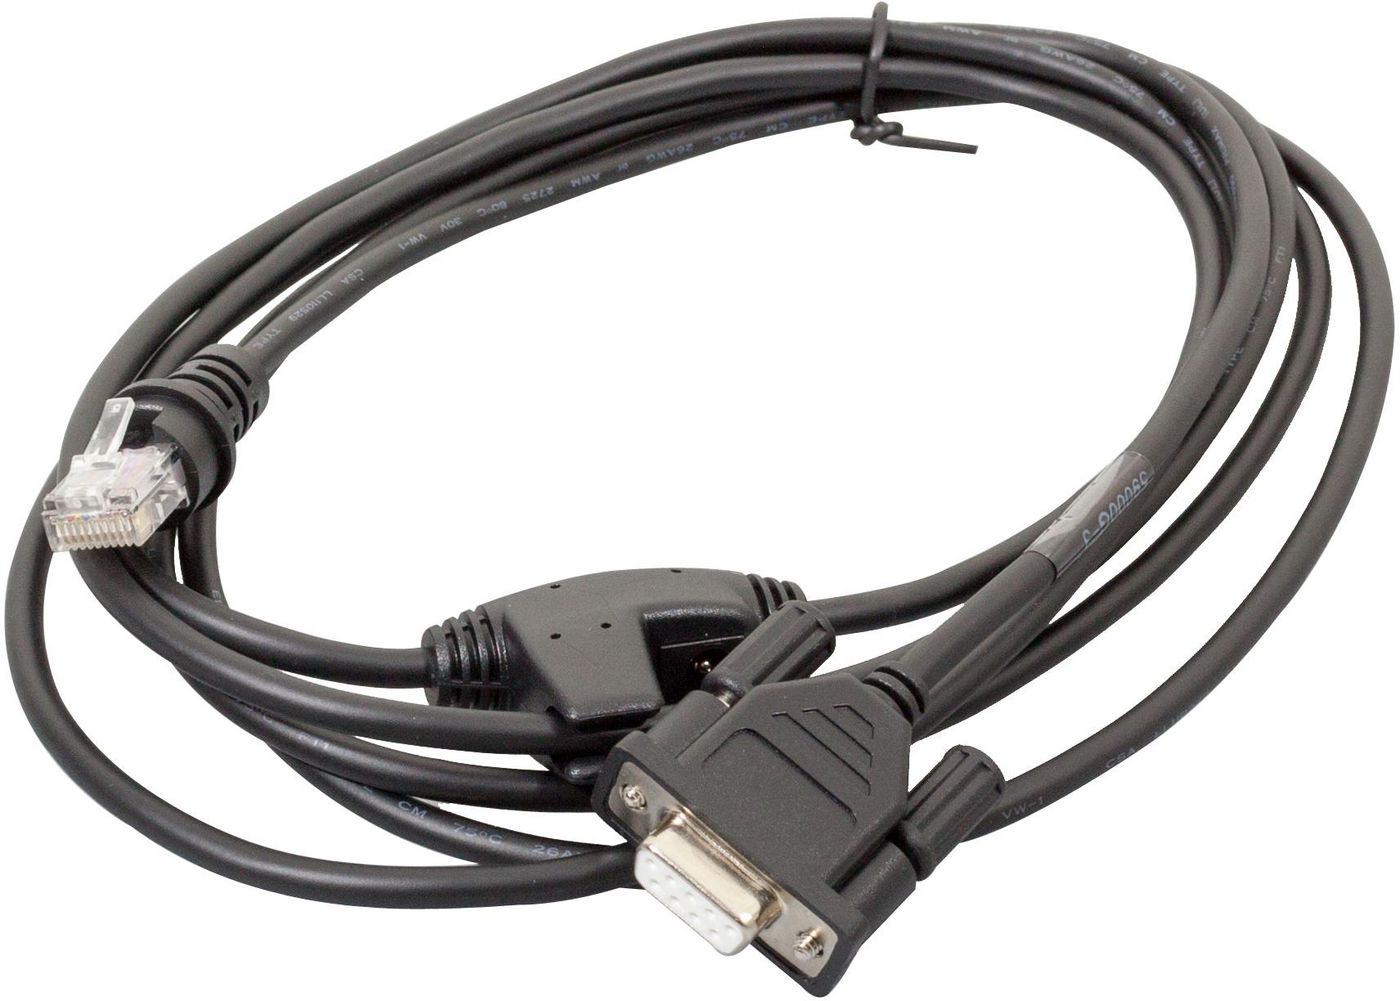 Honeywell 59-59000-3 cable , RS-232, black